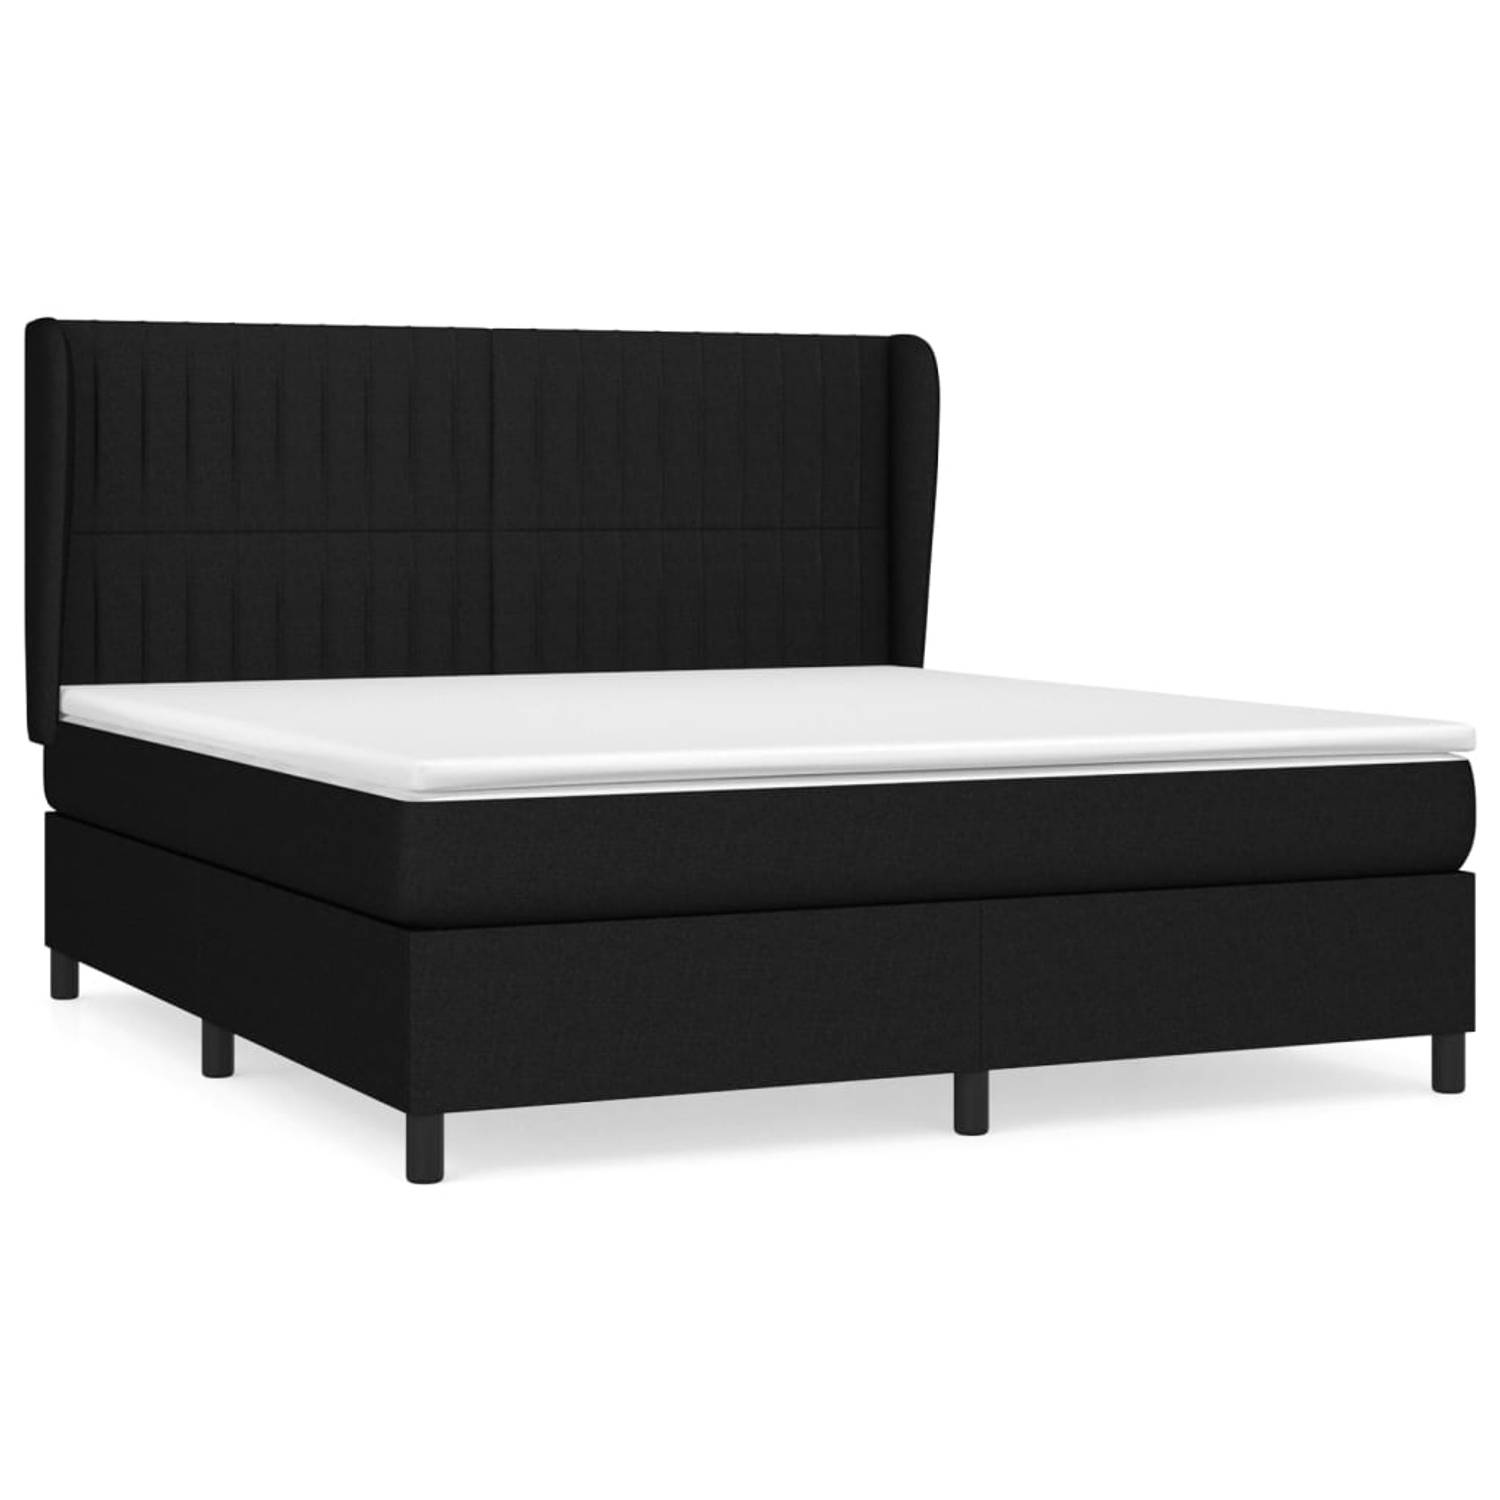 The Living Store Boxspringbed - Comfort - Bed - 203 x 163 x 118/128 cm - Duurzaam materiaal